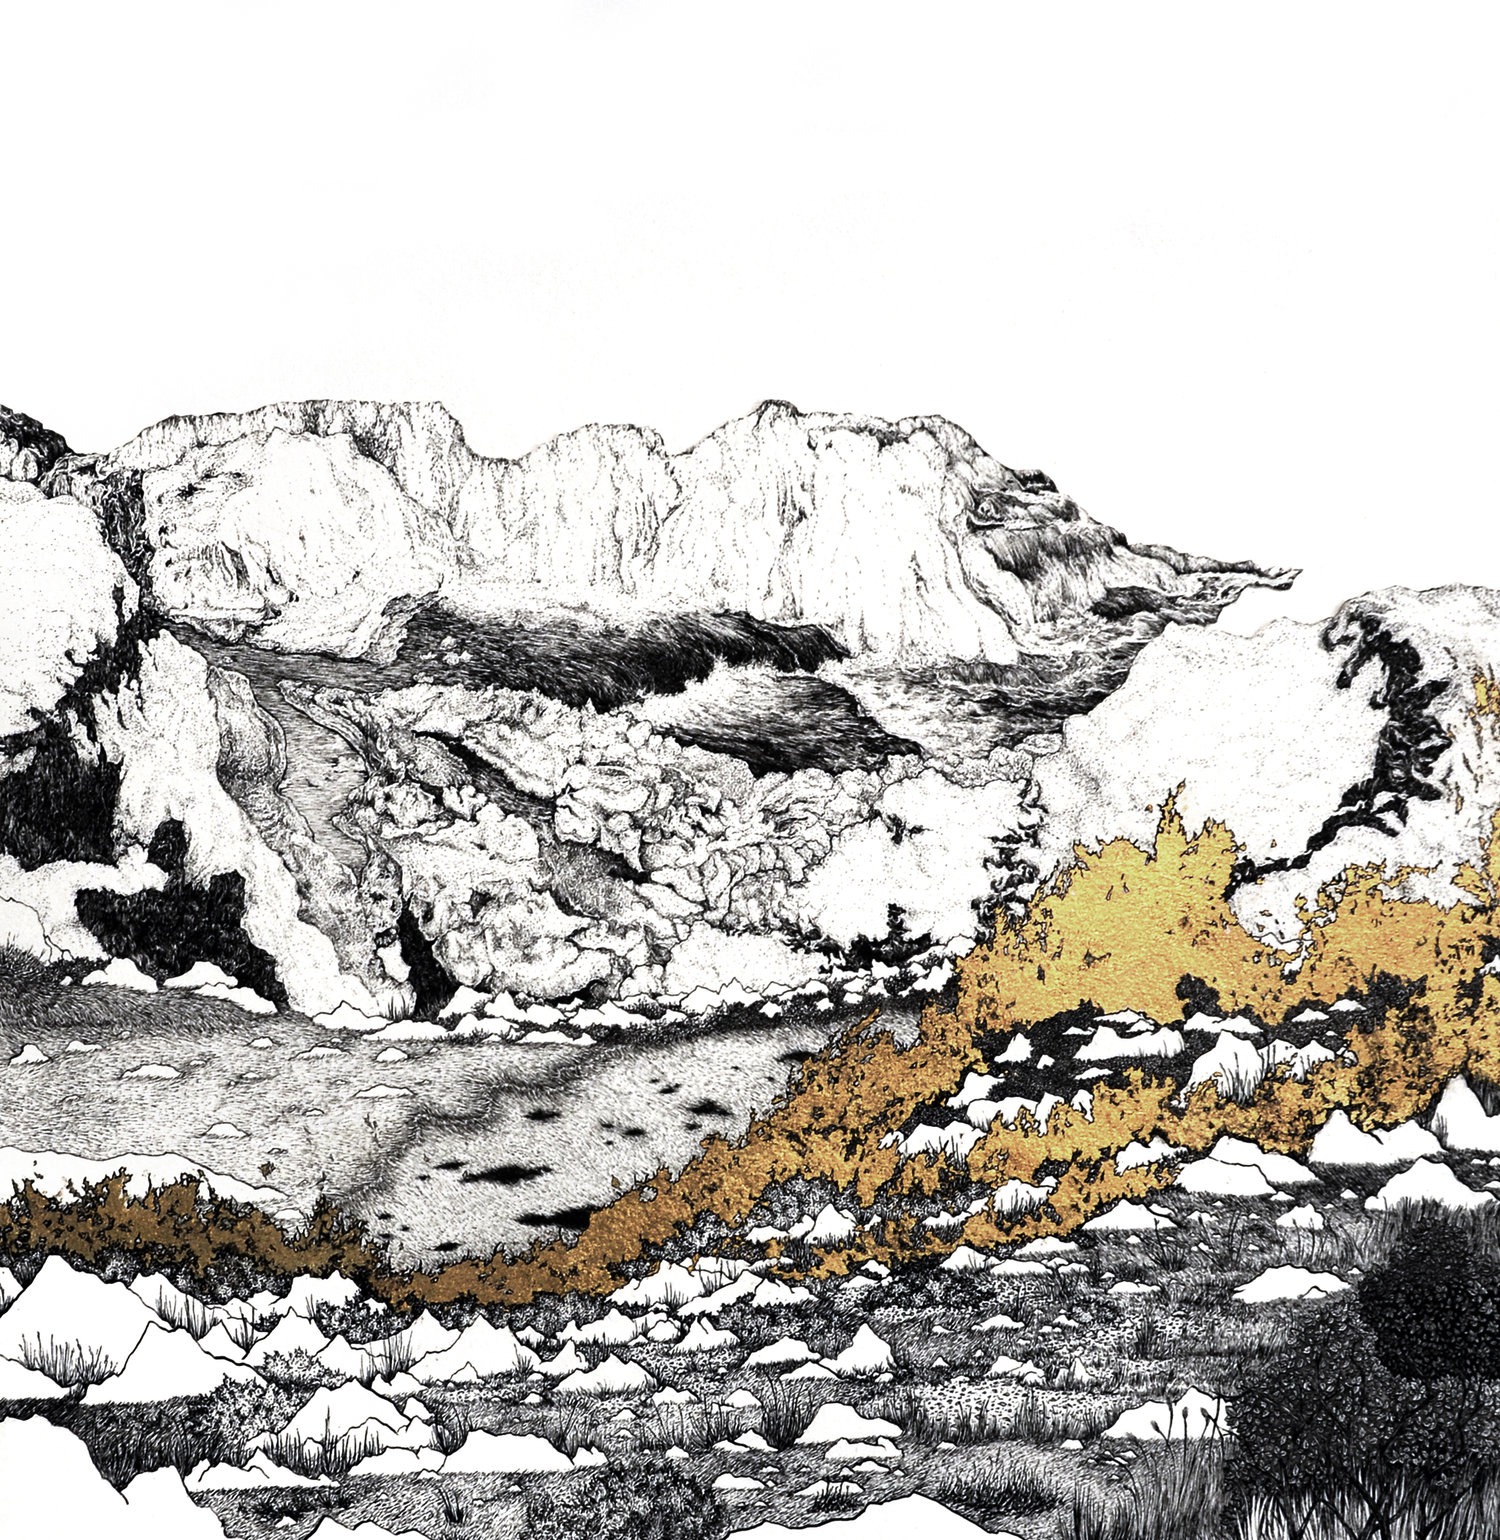 drawing of a mountainside on fire - the fire is picked out in gold leaf